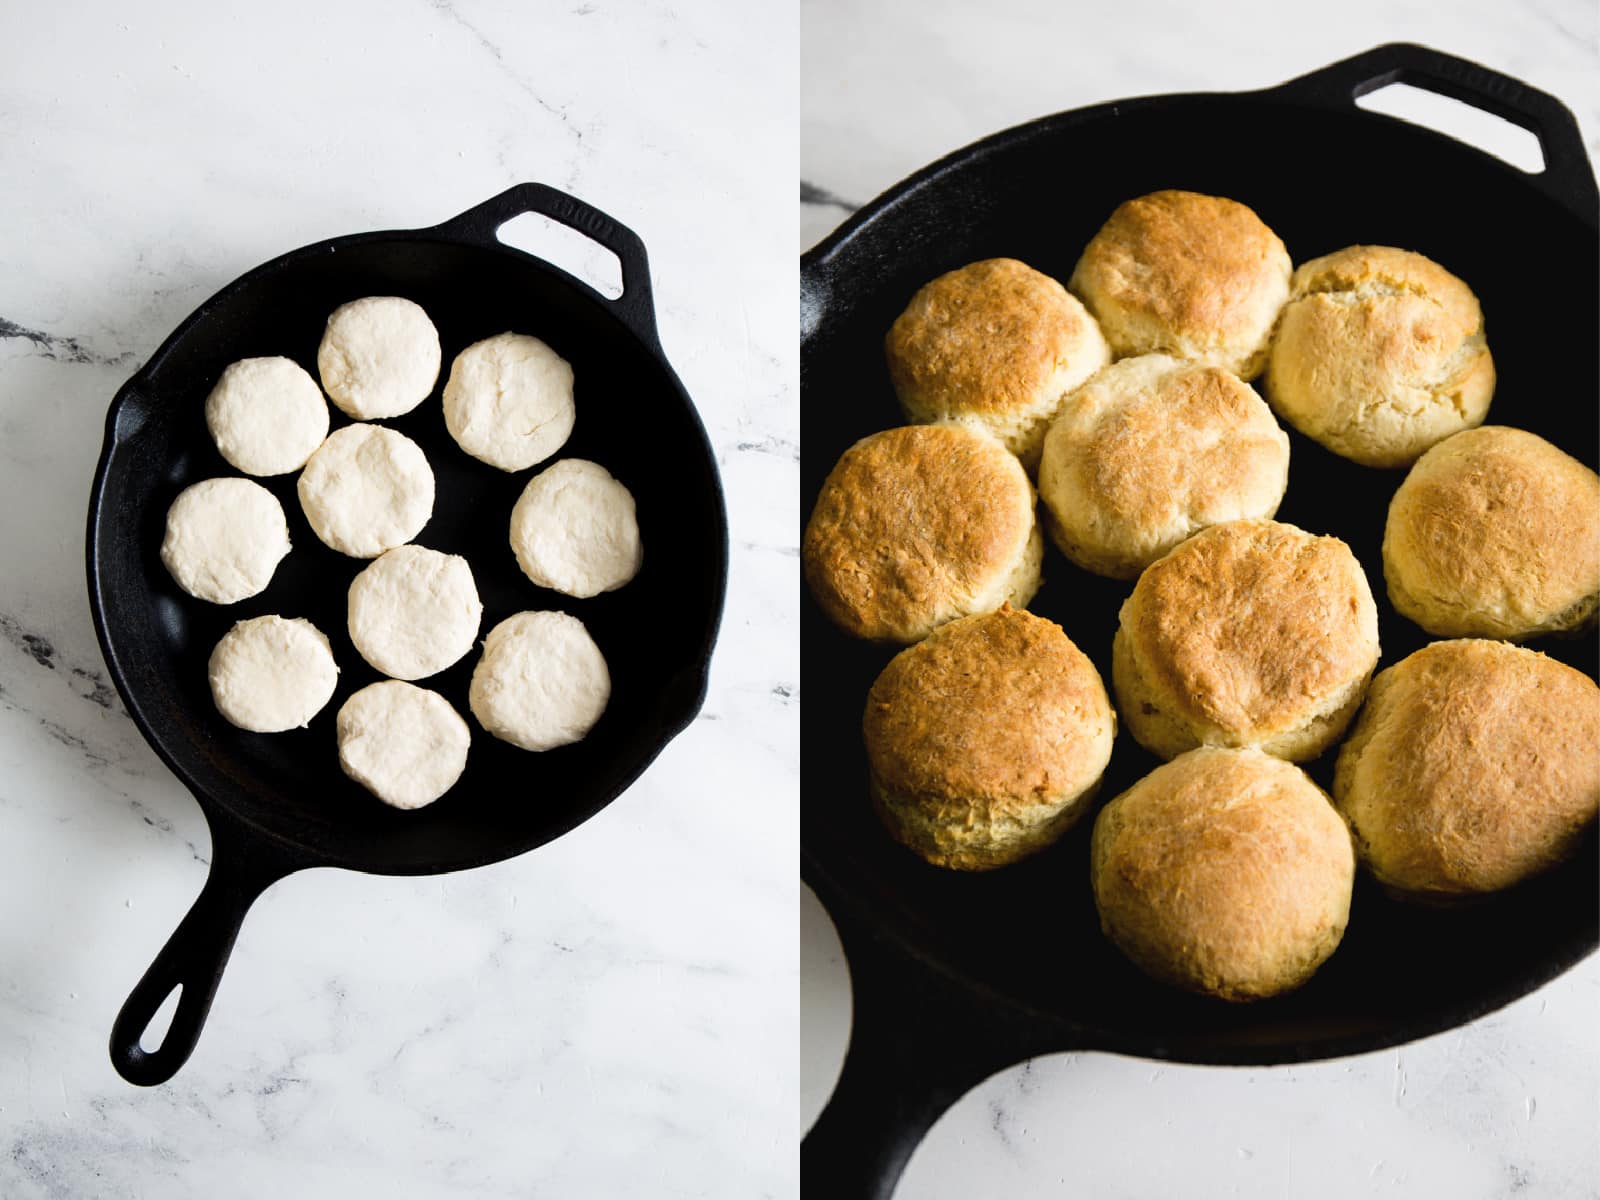 biscuits in a cast iron skillet step-by-step